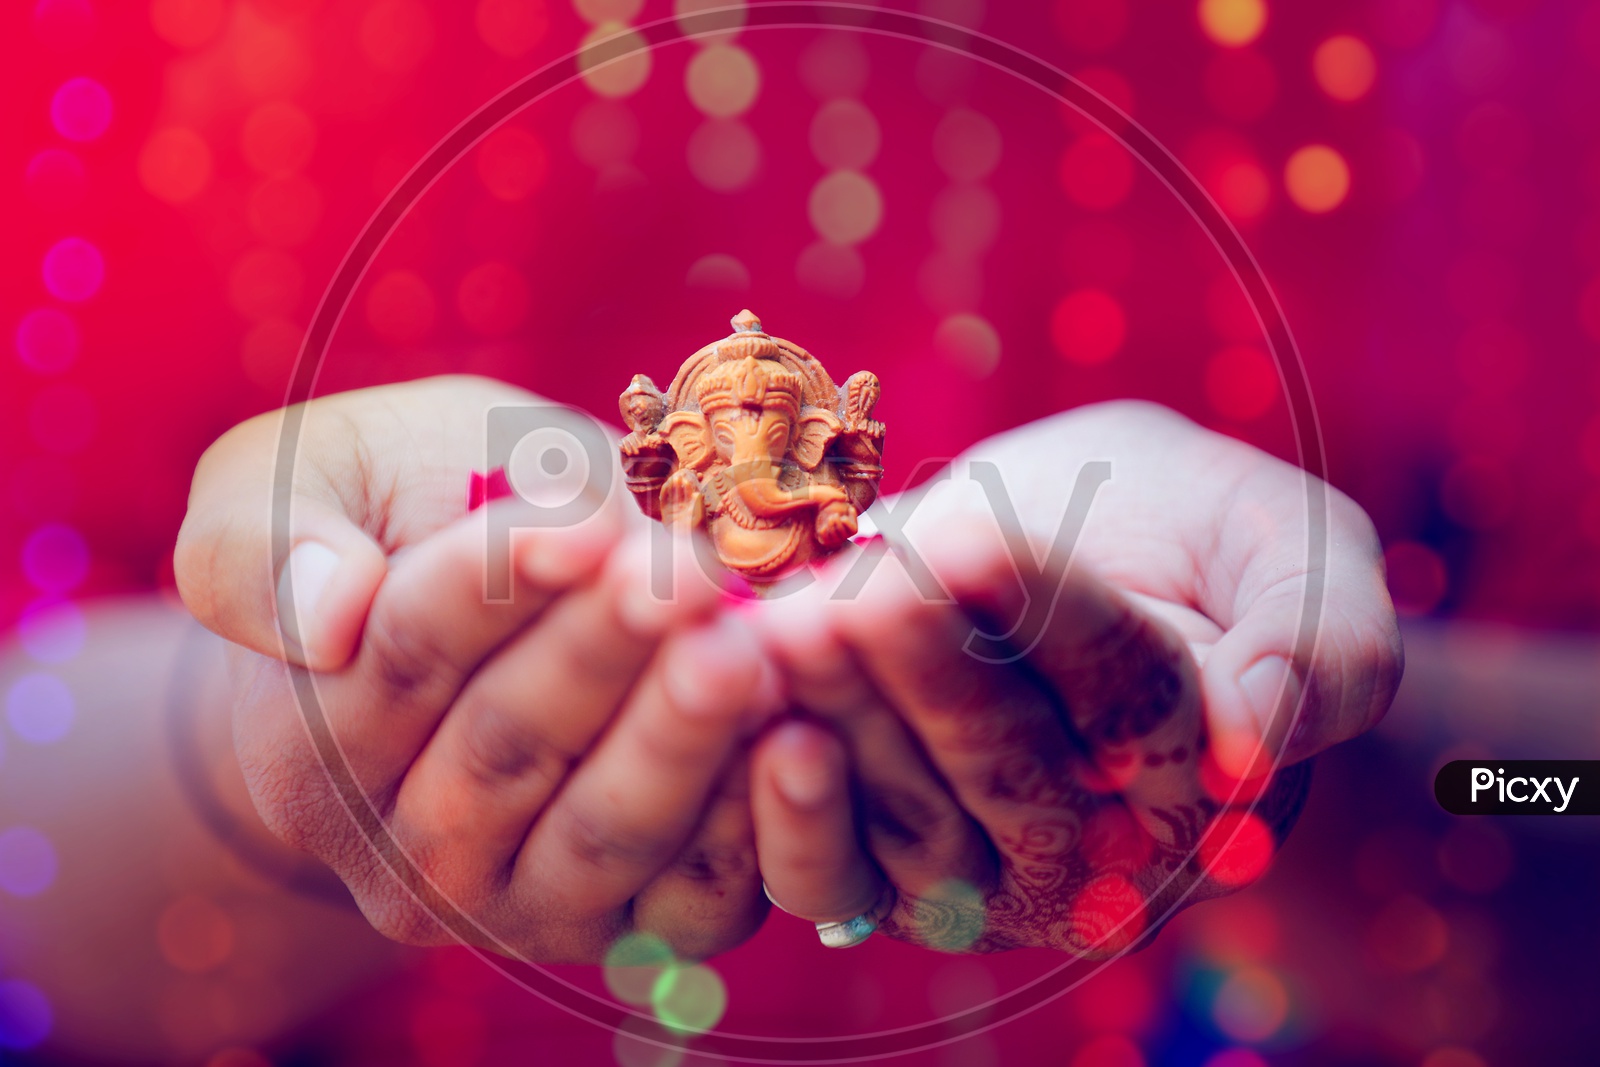 Ganesh Idol placed in Hands with beautiful bokeh in the background  / Lord Ganesha